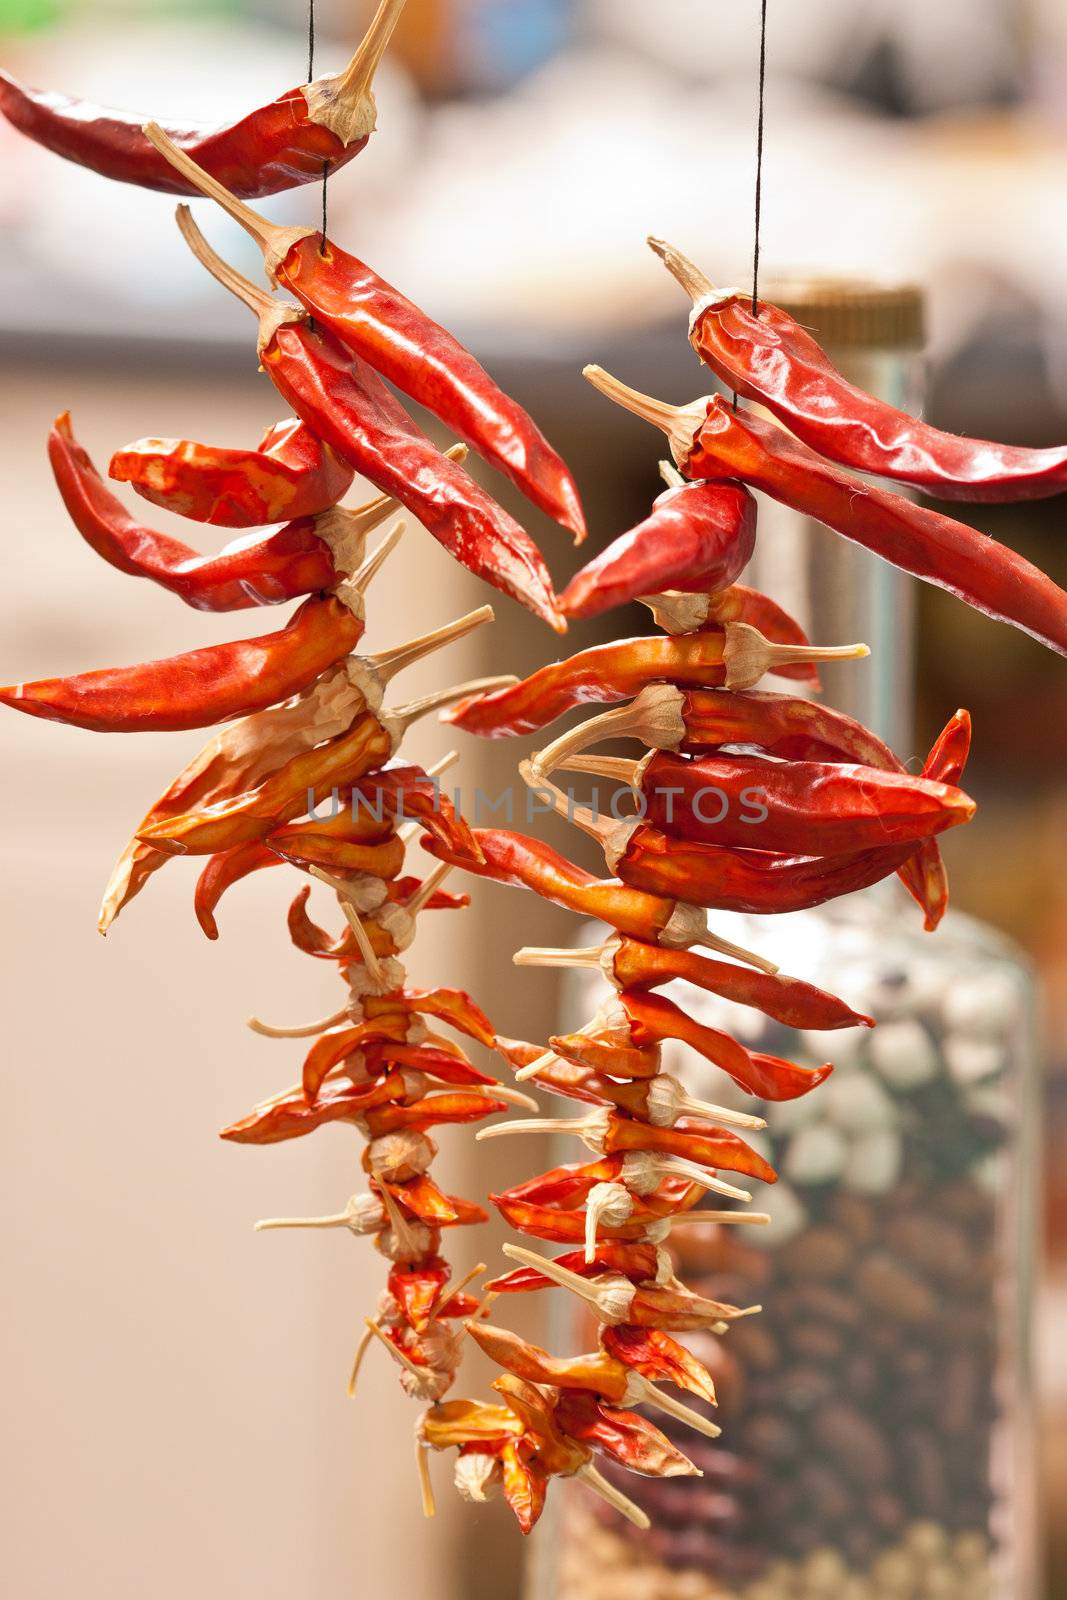 food series: dry red pepper as spicery